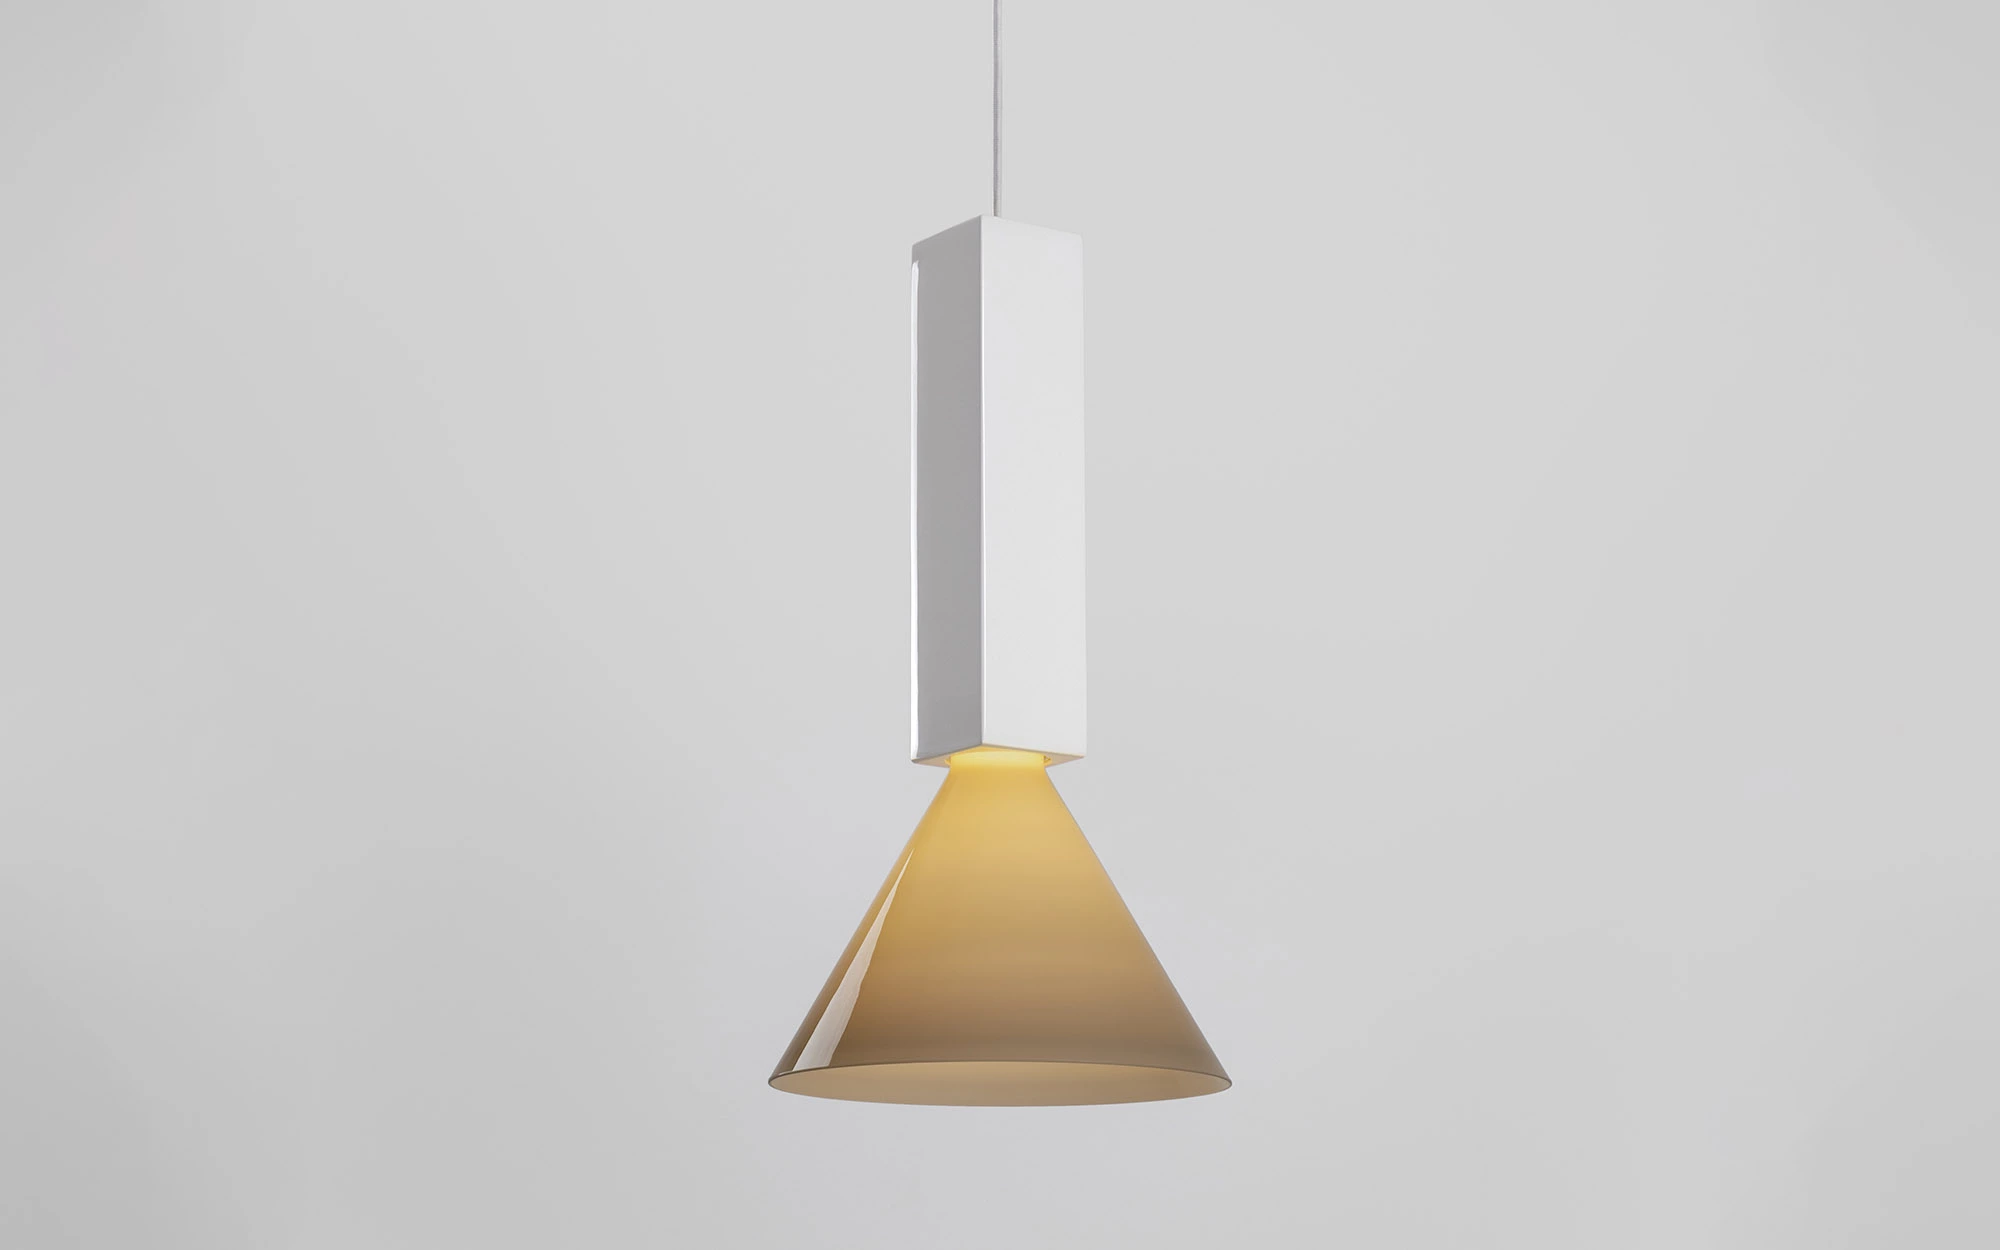 Signal C1 MONOCHROMATIC - Edward and Jay Barber and Osgerby - Pendant light - Galerie kreo